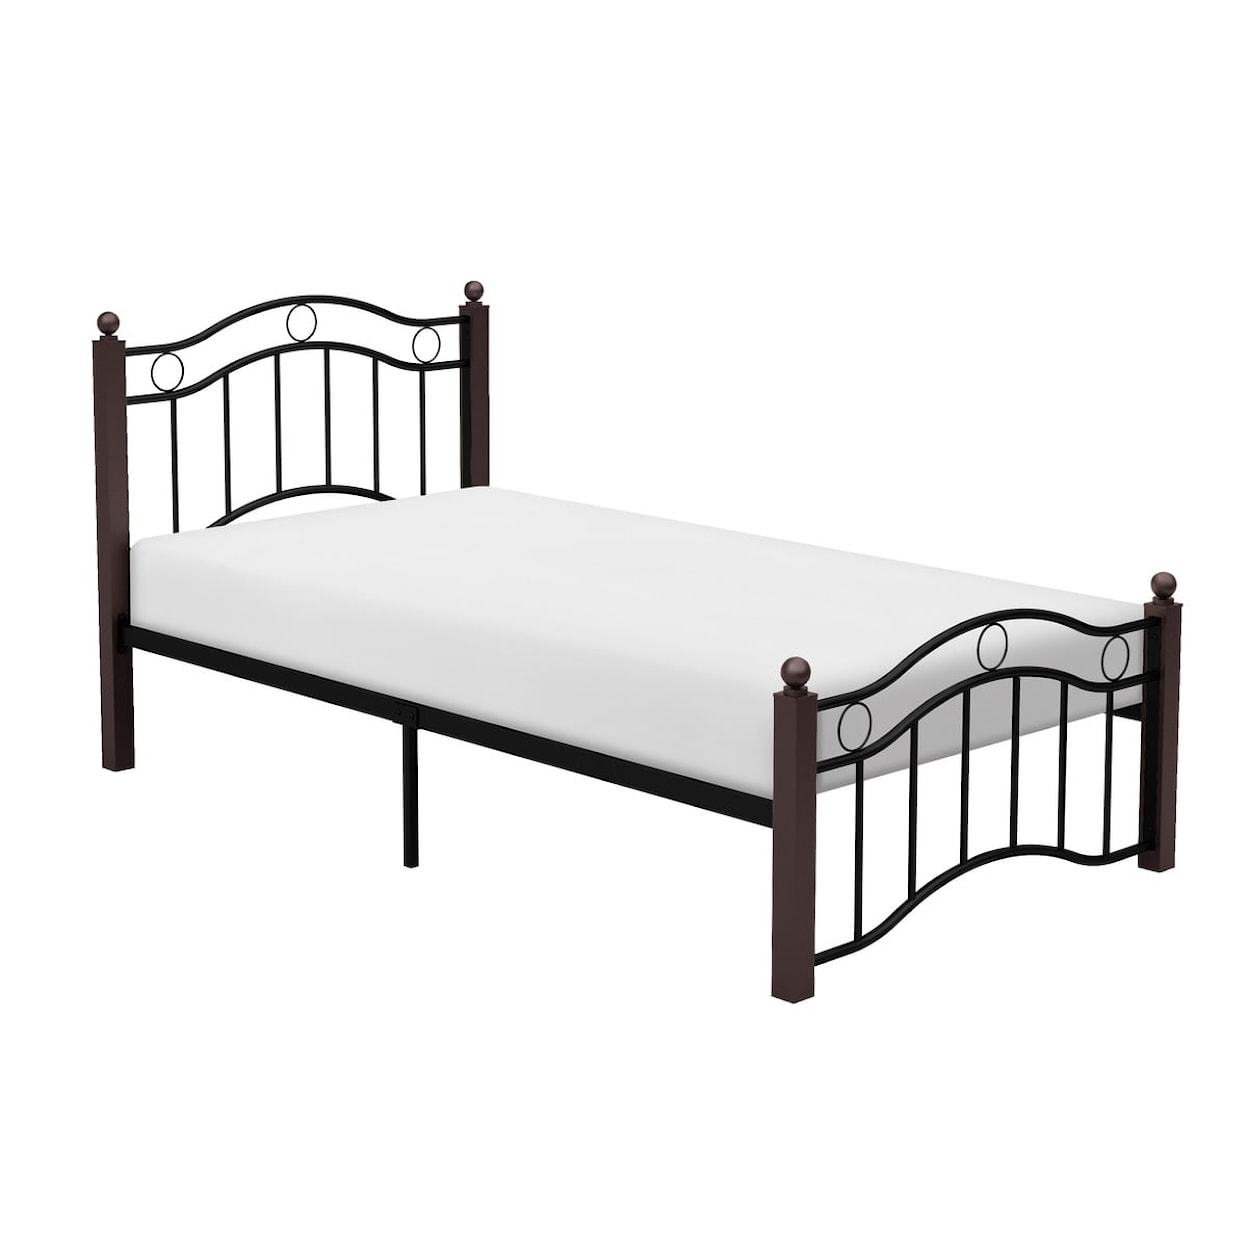 Homelegance Averny Twin  Bed